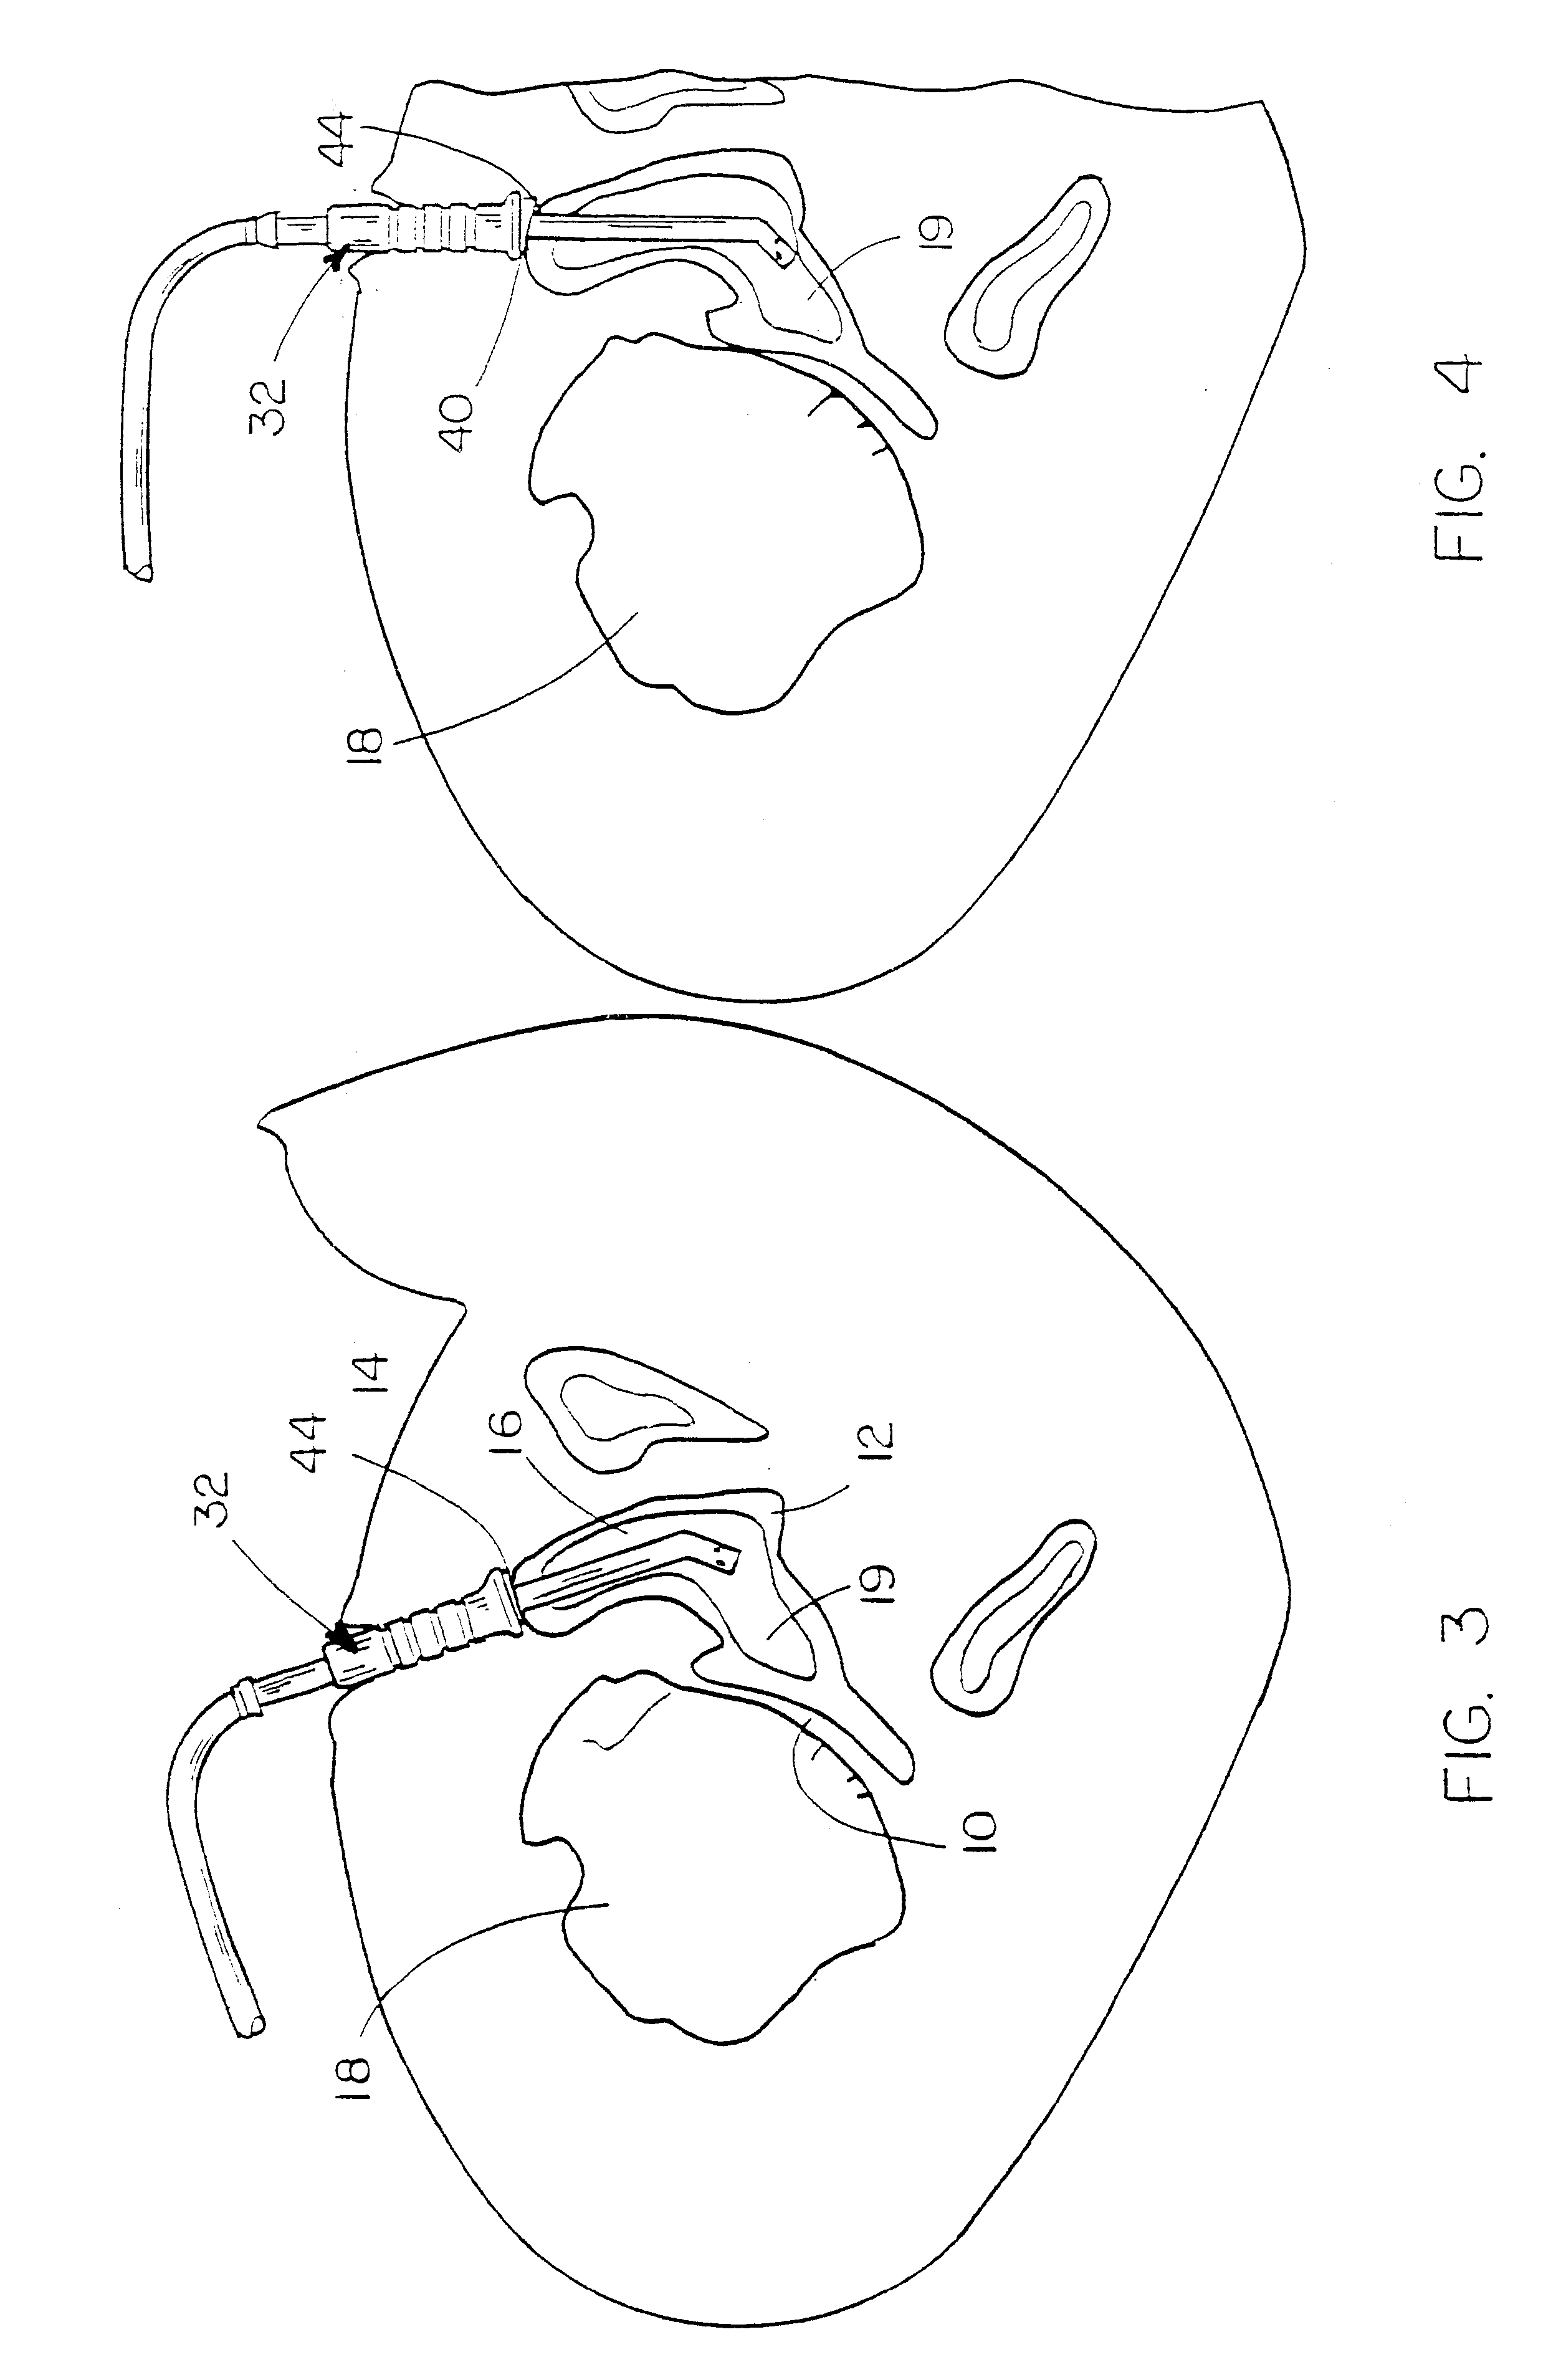 Method and means for cementing a liner onto the face of the glenoid cavity of a scapula